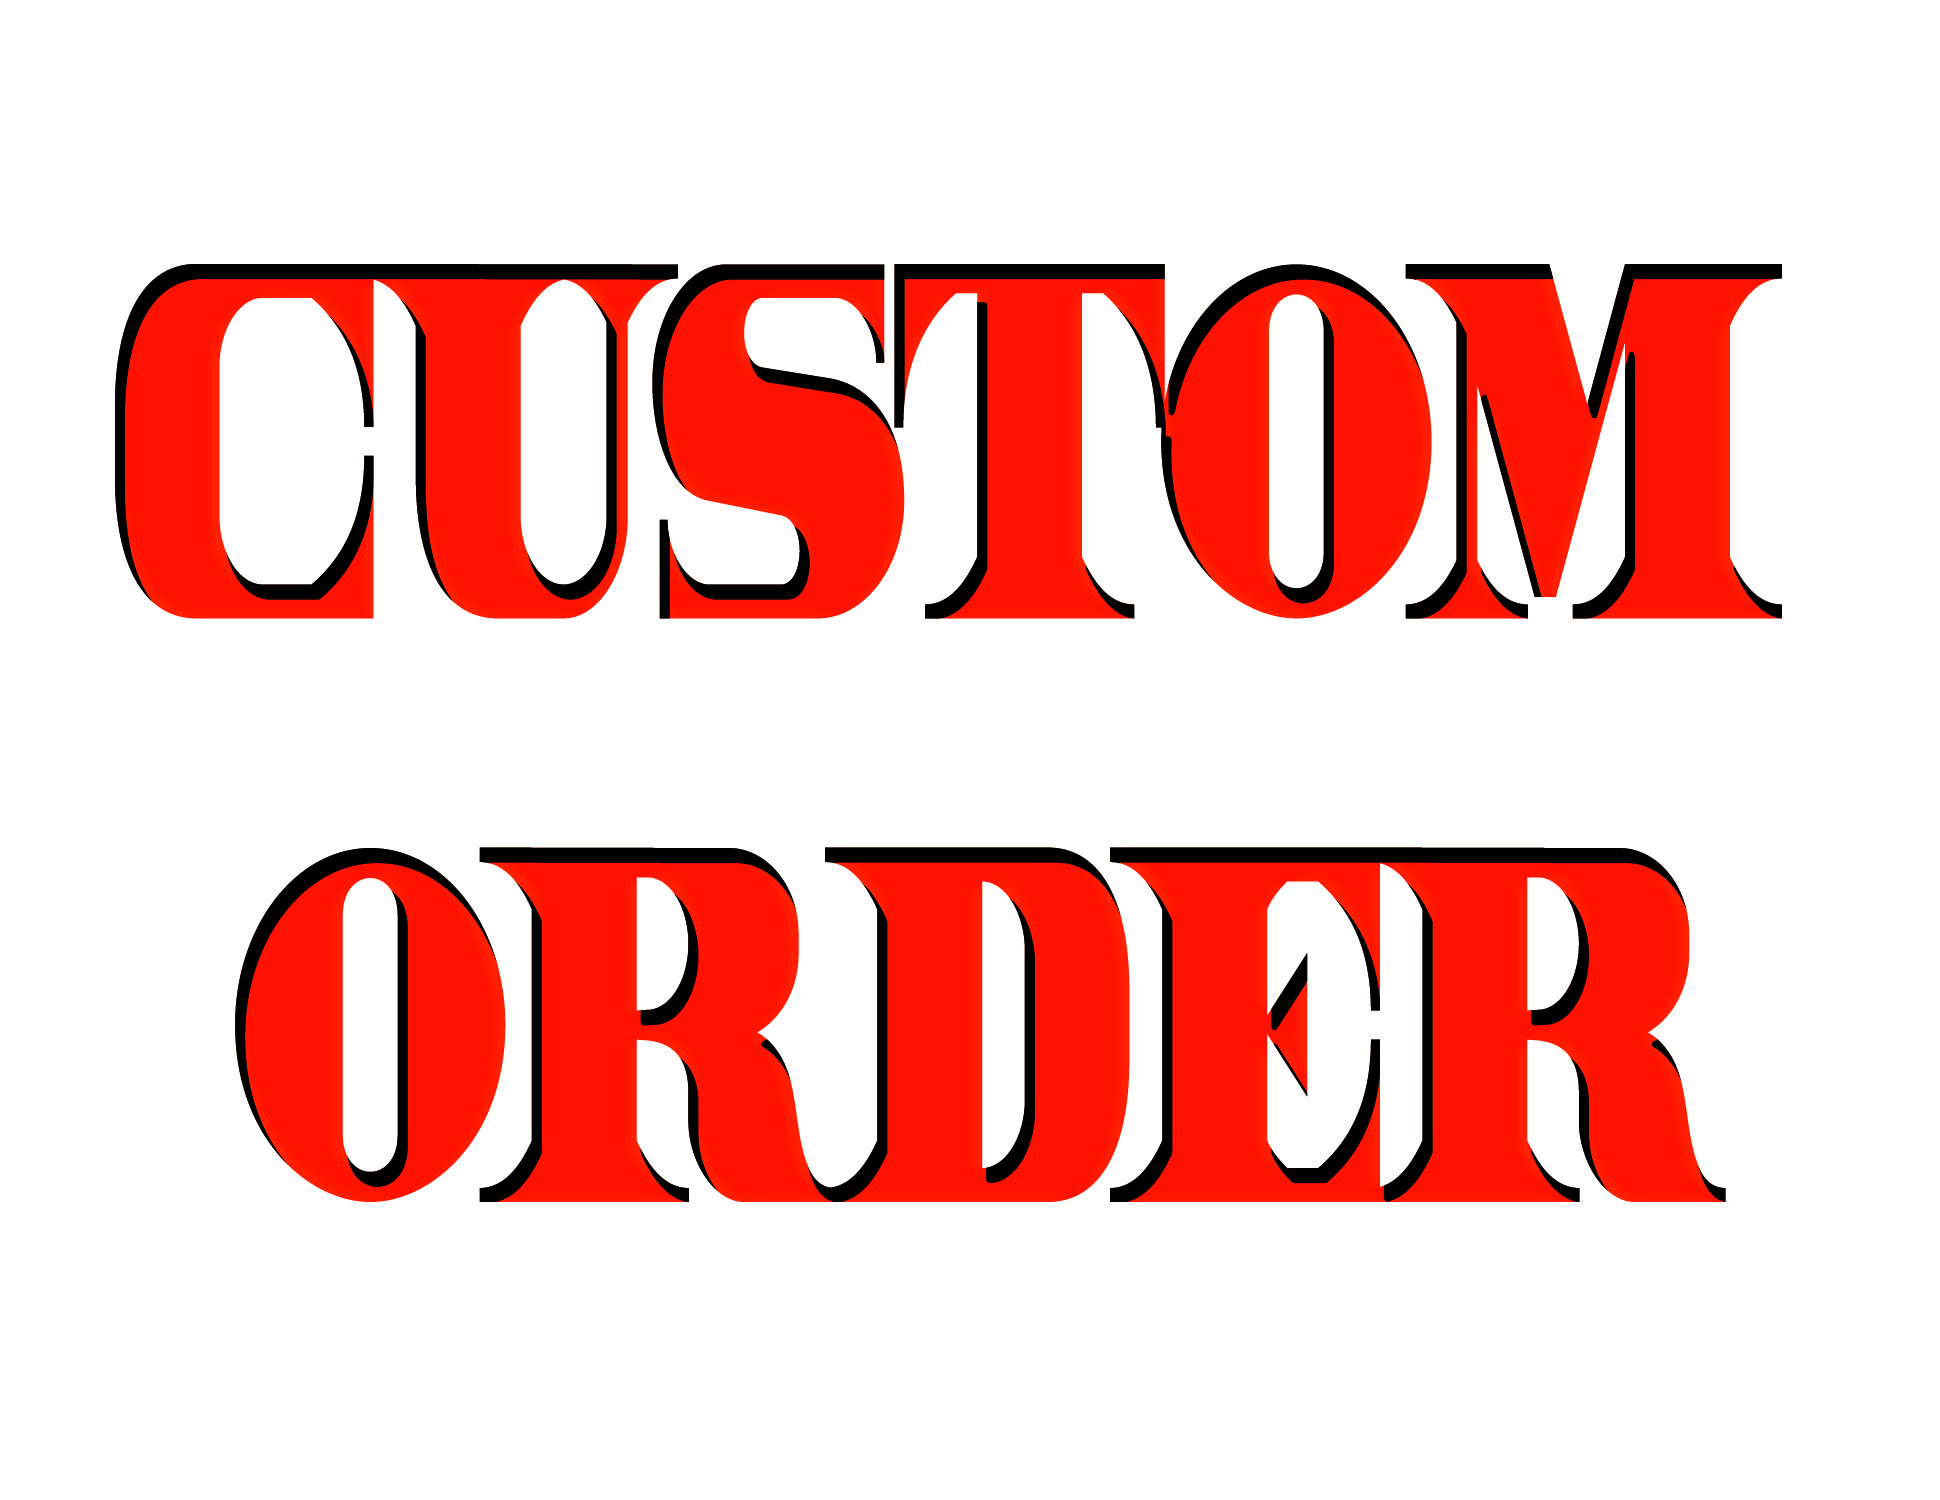 CUSTOMIZED ORDER AFTER AGREEMENT